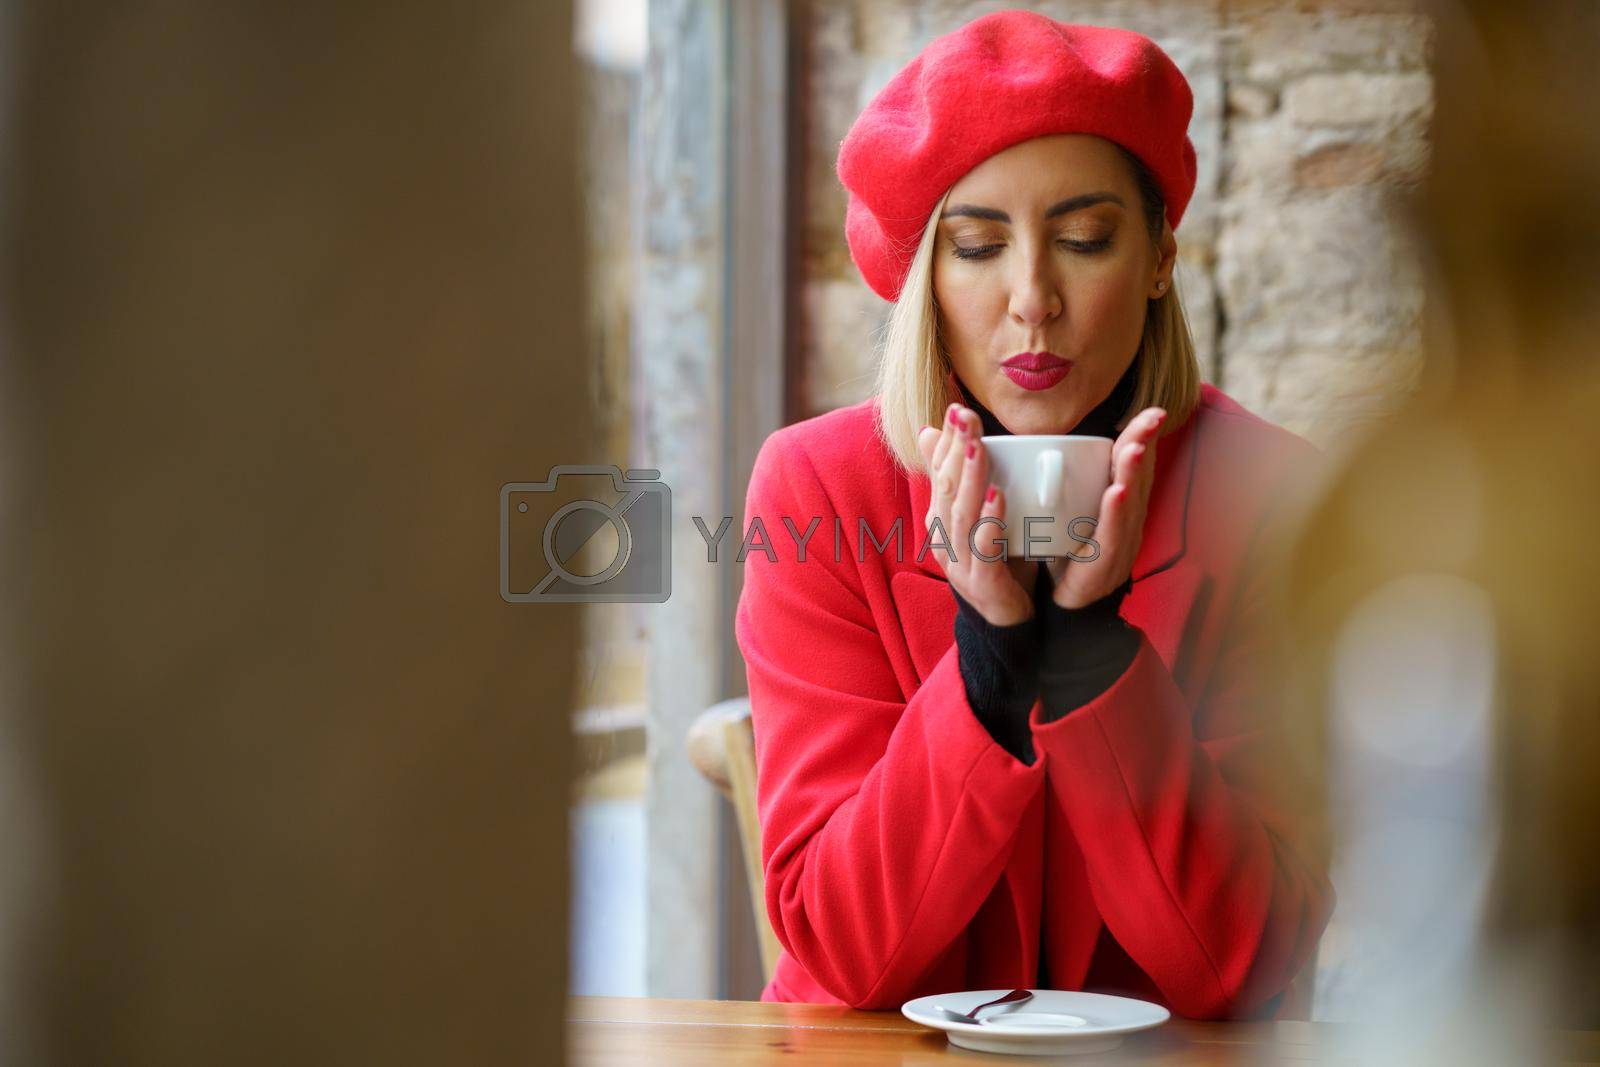 Royalty free image of Woman blowing on hot coffee in cafe by javiindy